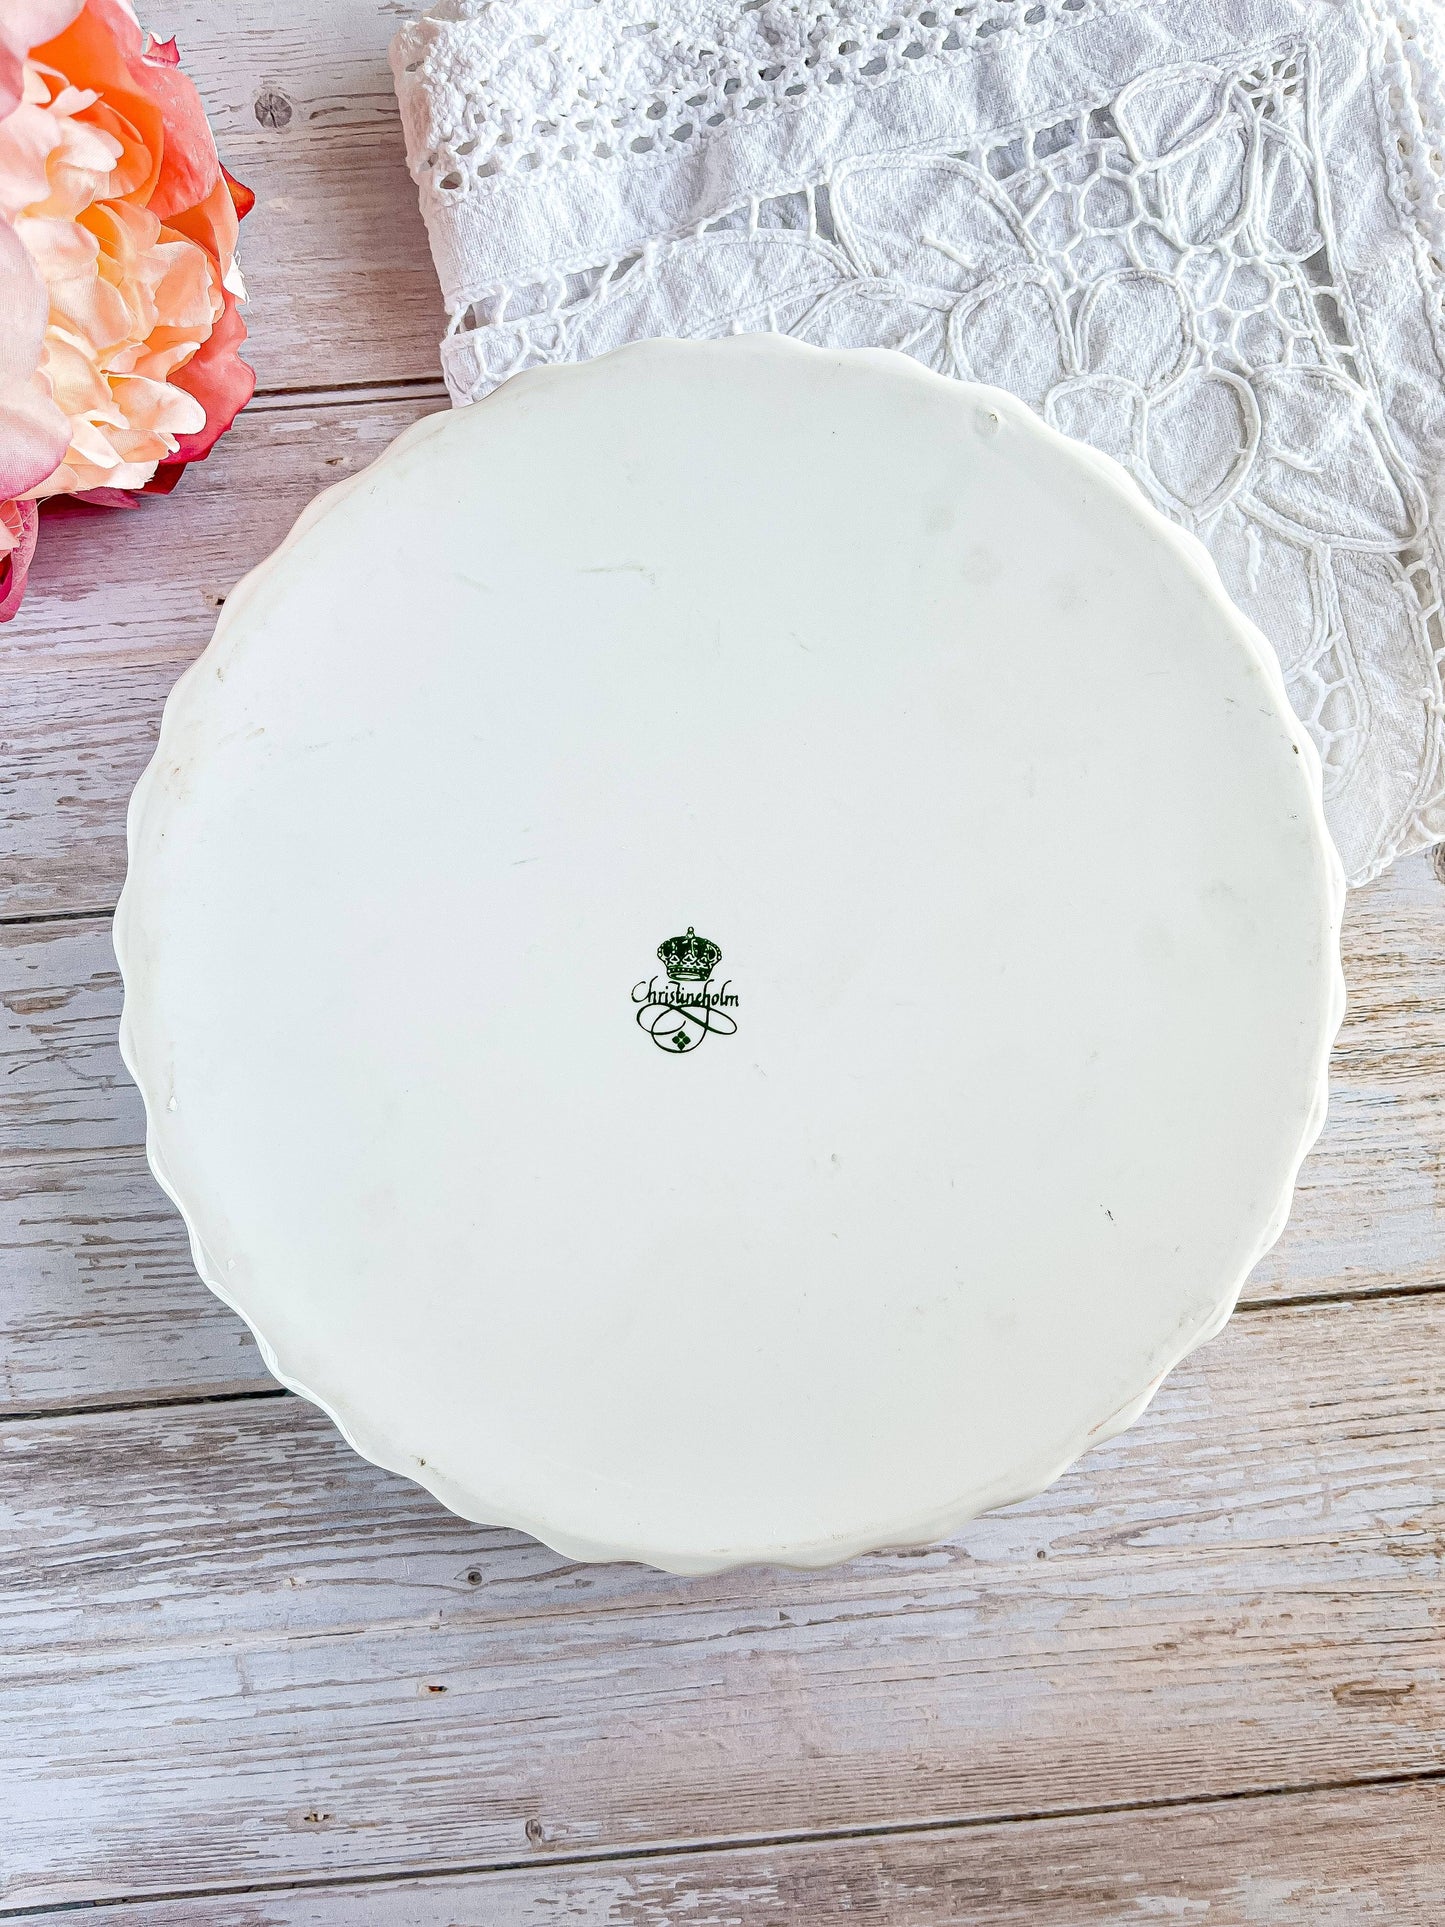 Christineholm Pie/Quiche Dish - ‘Rose’ Collection - SOSC Home